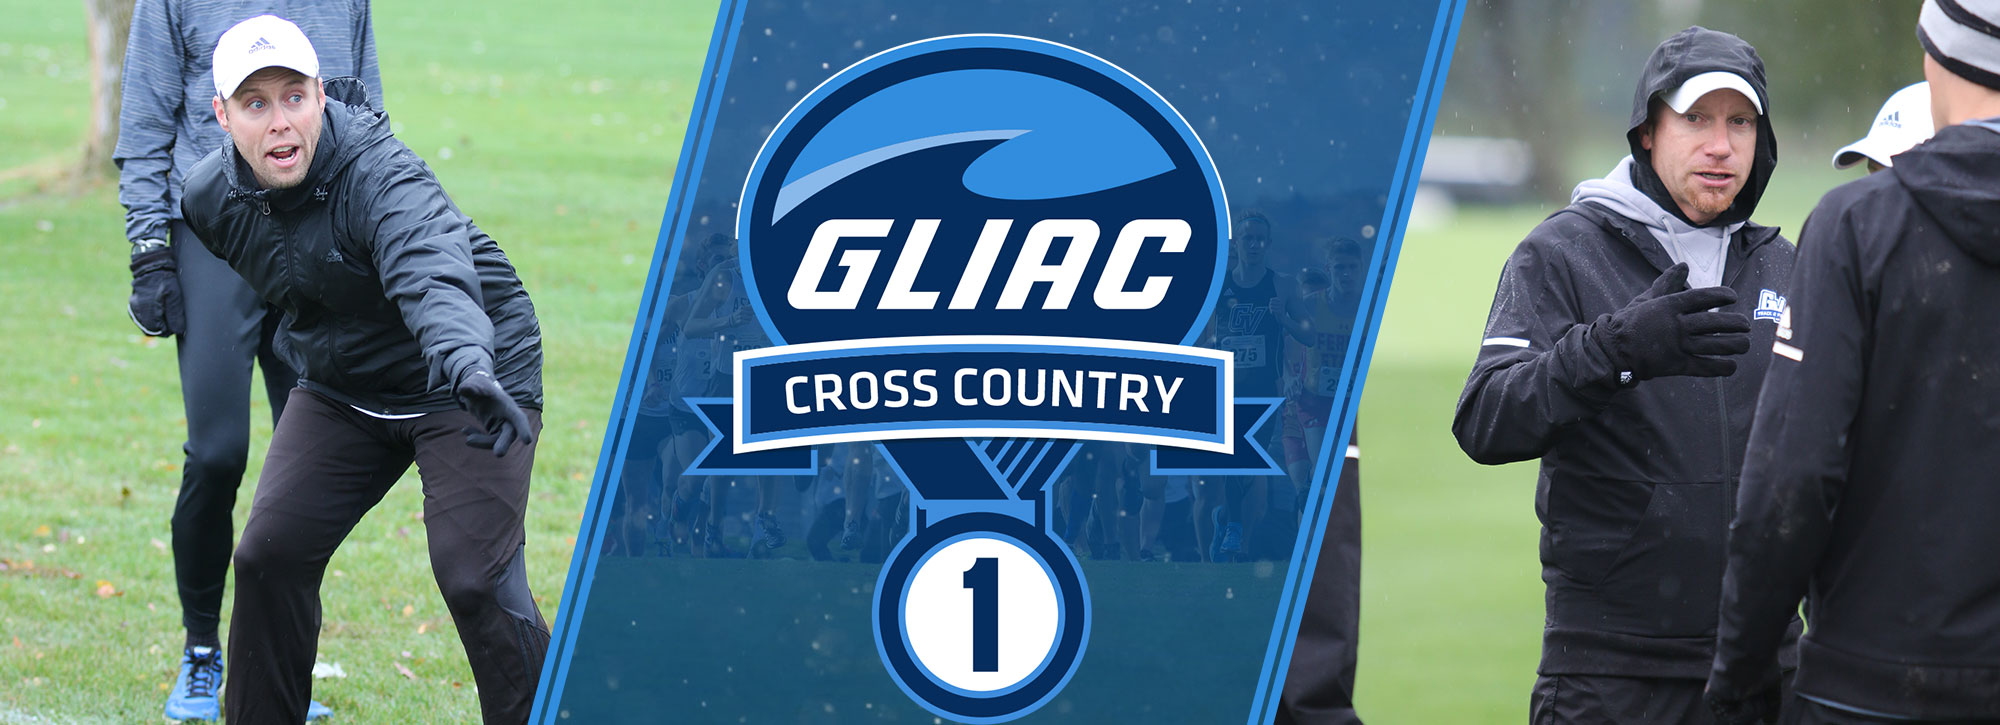 Grand Valley State Named 2018 GLIAC Cross Country Coaching Staffs of the Year